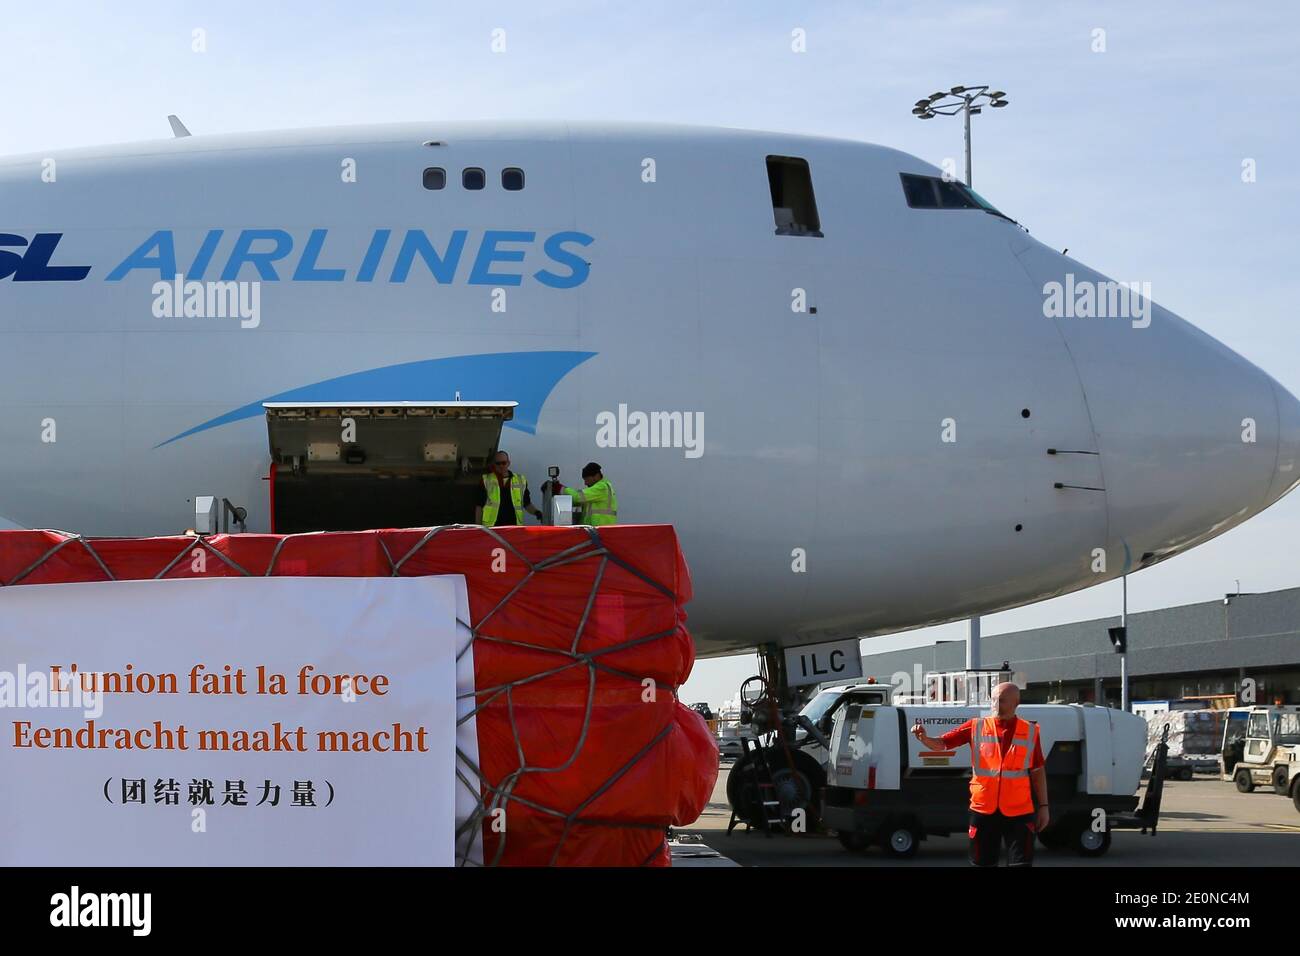 Beijing, Belgium. 16th Mar, 2020. Chinese medical supplies for Belgium are unloaded at the Liege Airport in Liege, Belgium, on March 16, 2020. Credit: Zhang Cheng/Xinhua/Alamy Live News Stock Photo